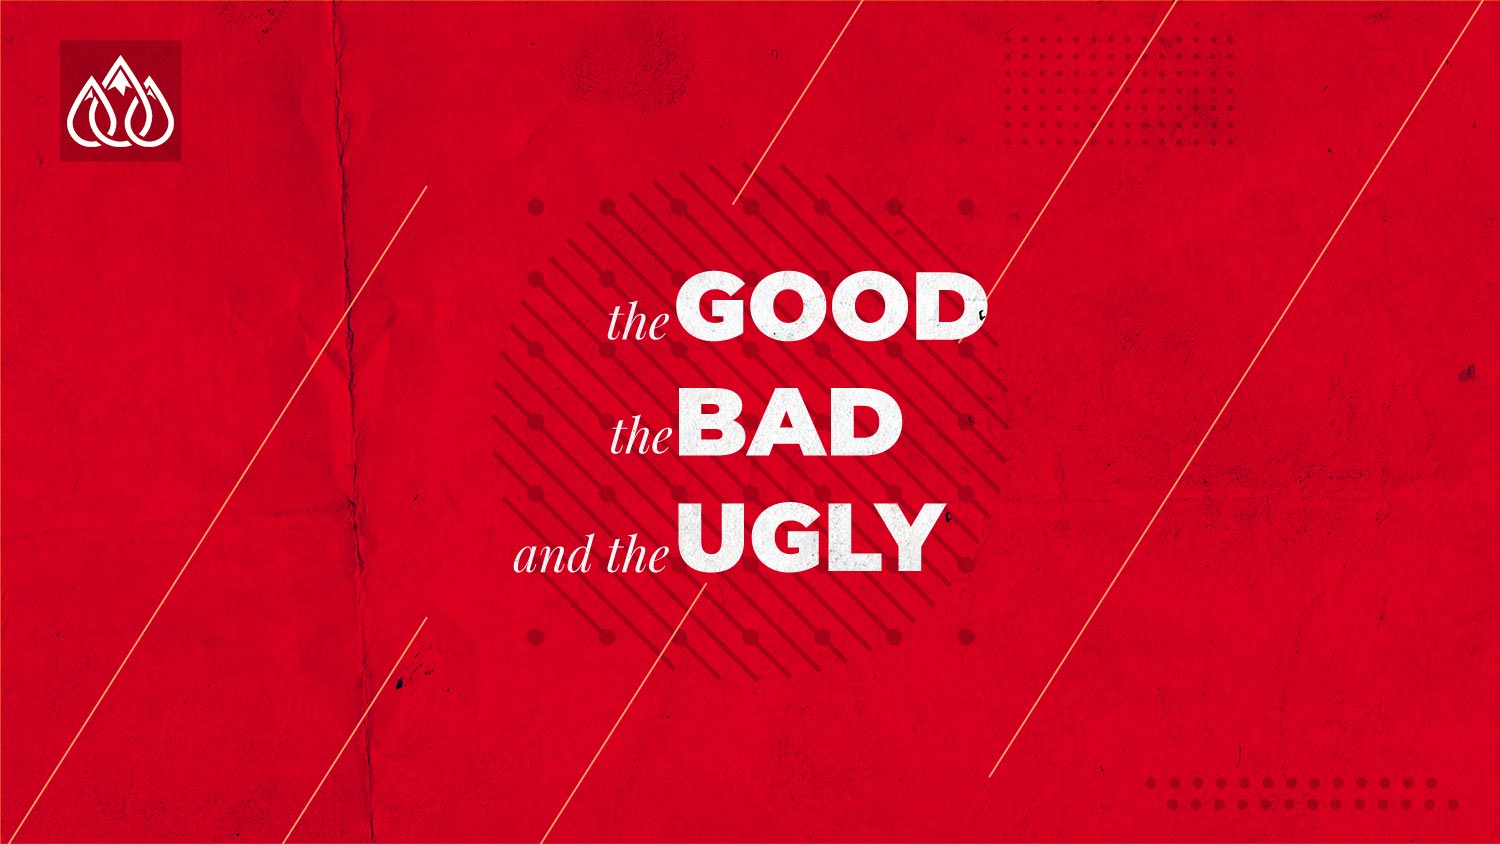 The Good, the Bad, and the Ugly Image